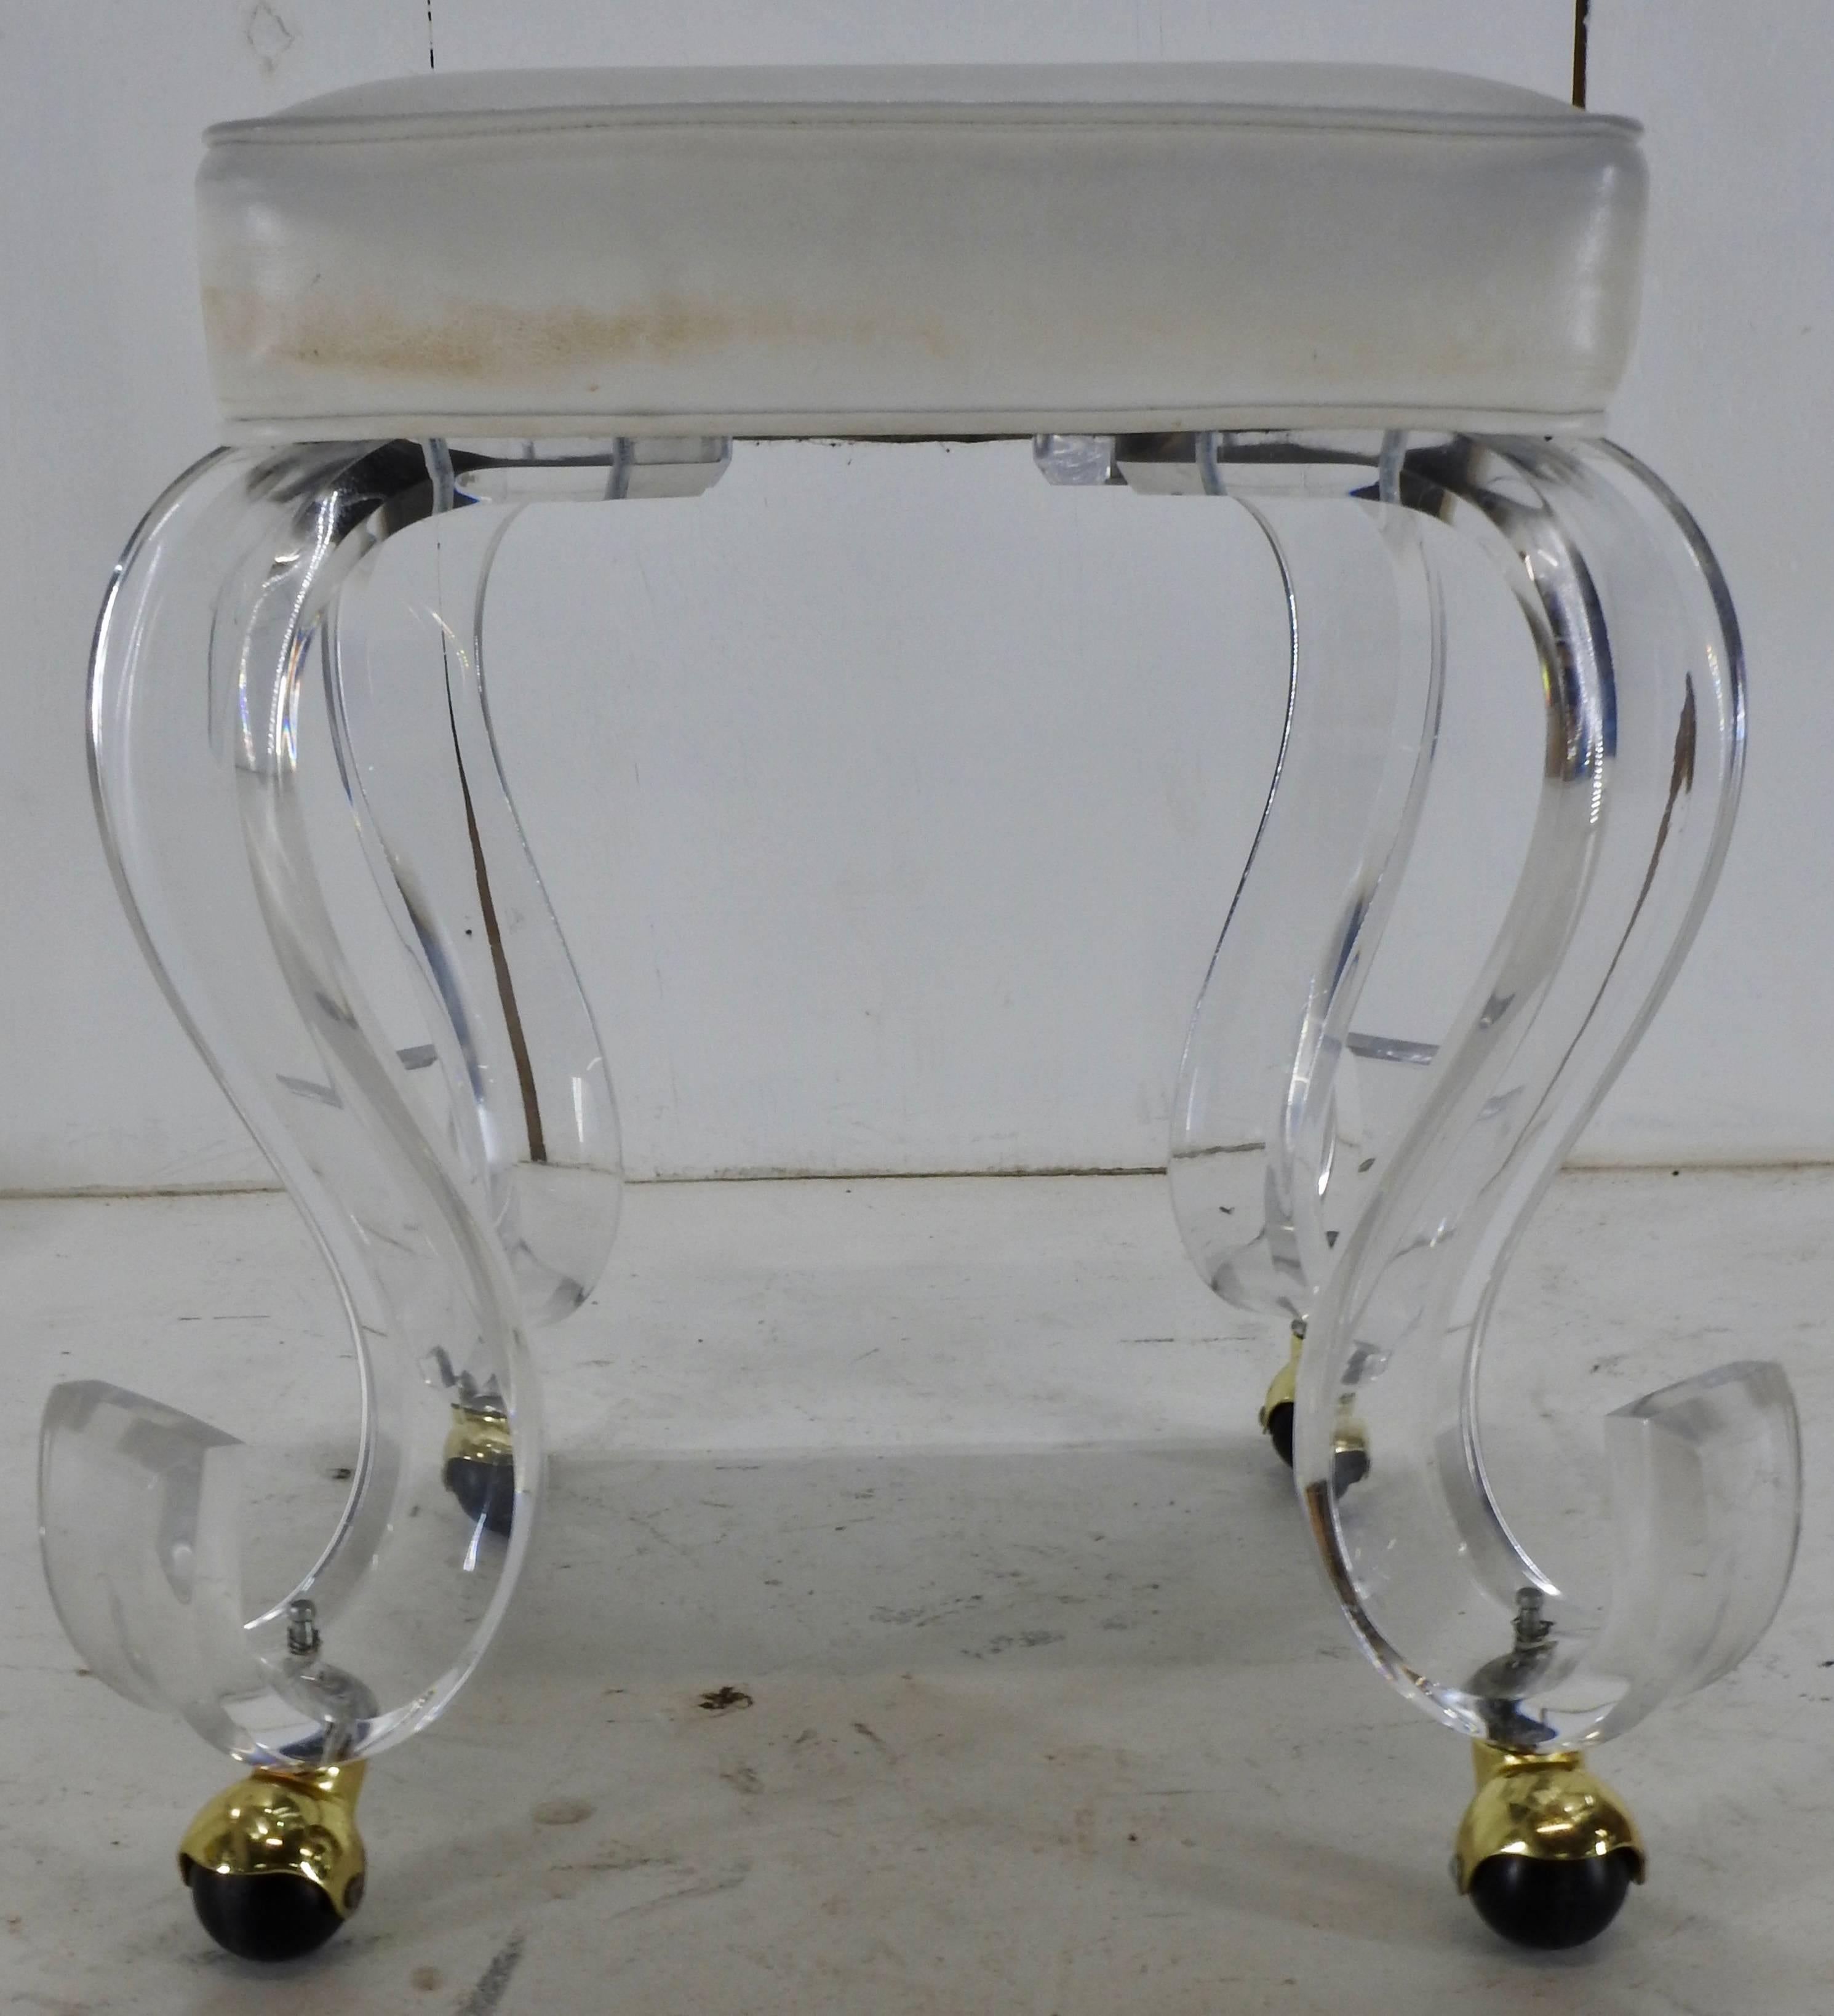 A modern era rolling stool on acrylic legs. The stool offers a white upholstered square seat set on ‘S’ shape acrylic legs with gold tone caster feet. A maker’s mark was not found on this piece.